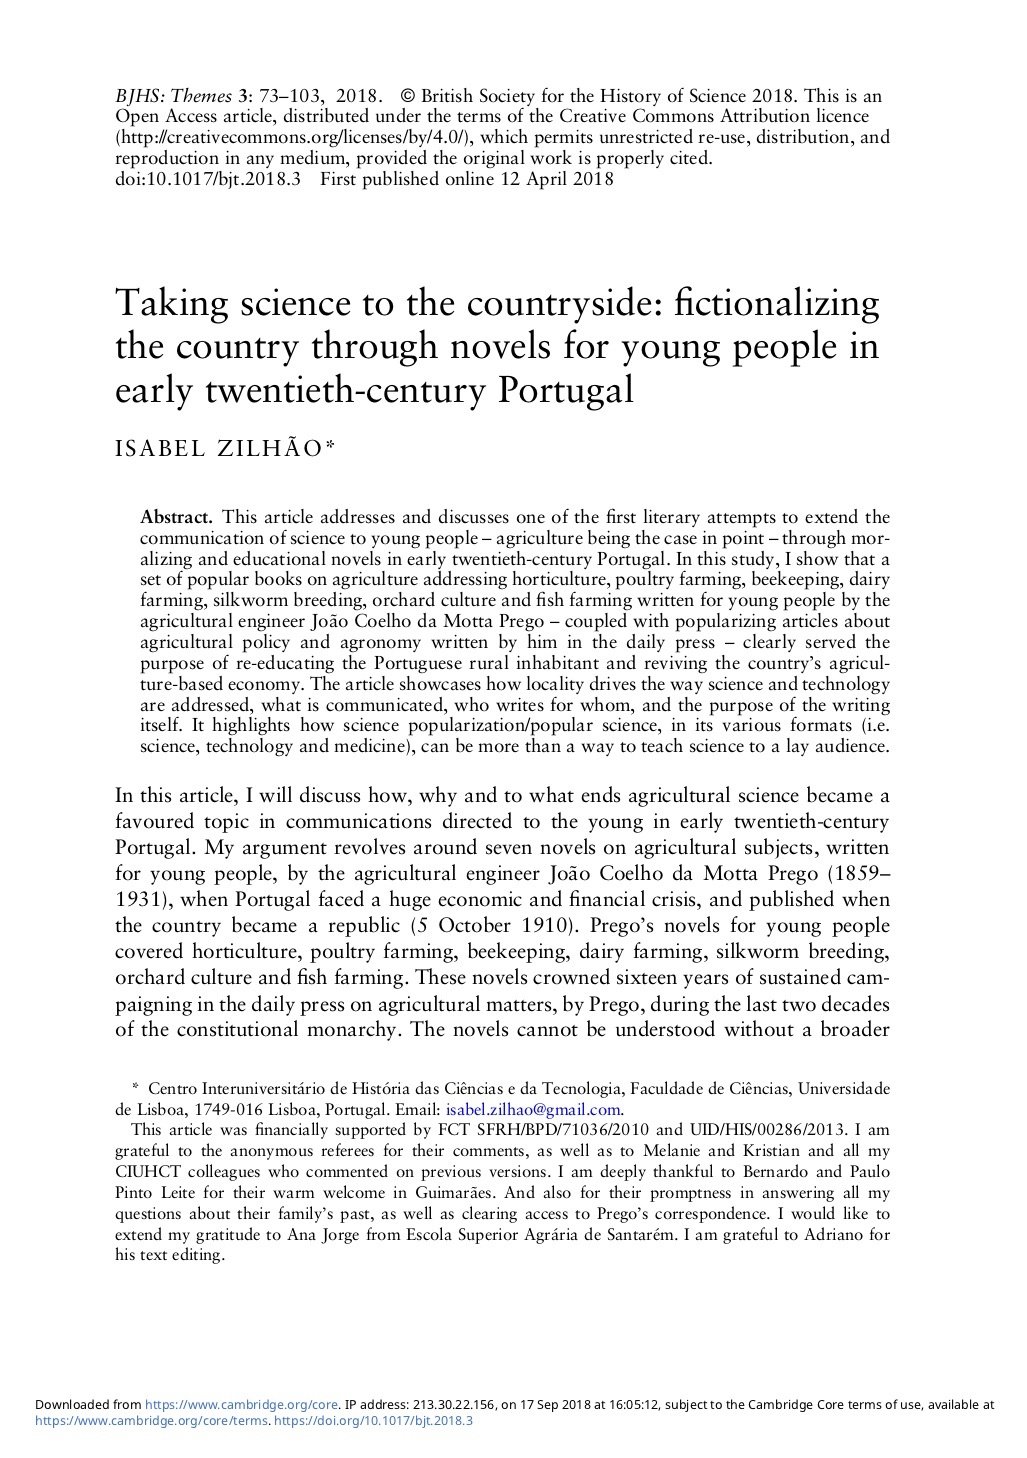 Taking science to the countryside: fictionalizing the country through novels for young people in early twentieth-century Portugal, Capa